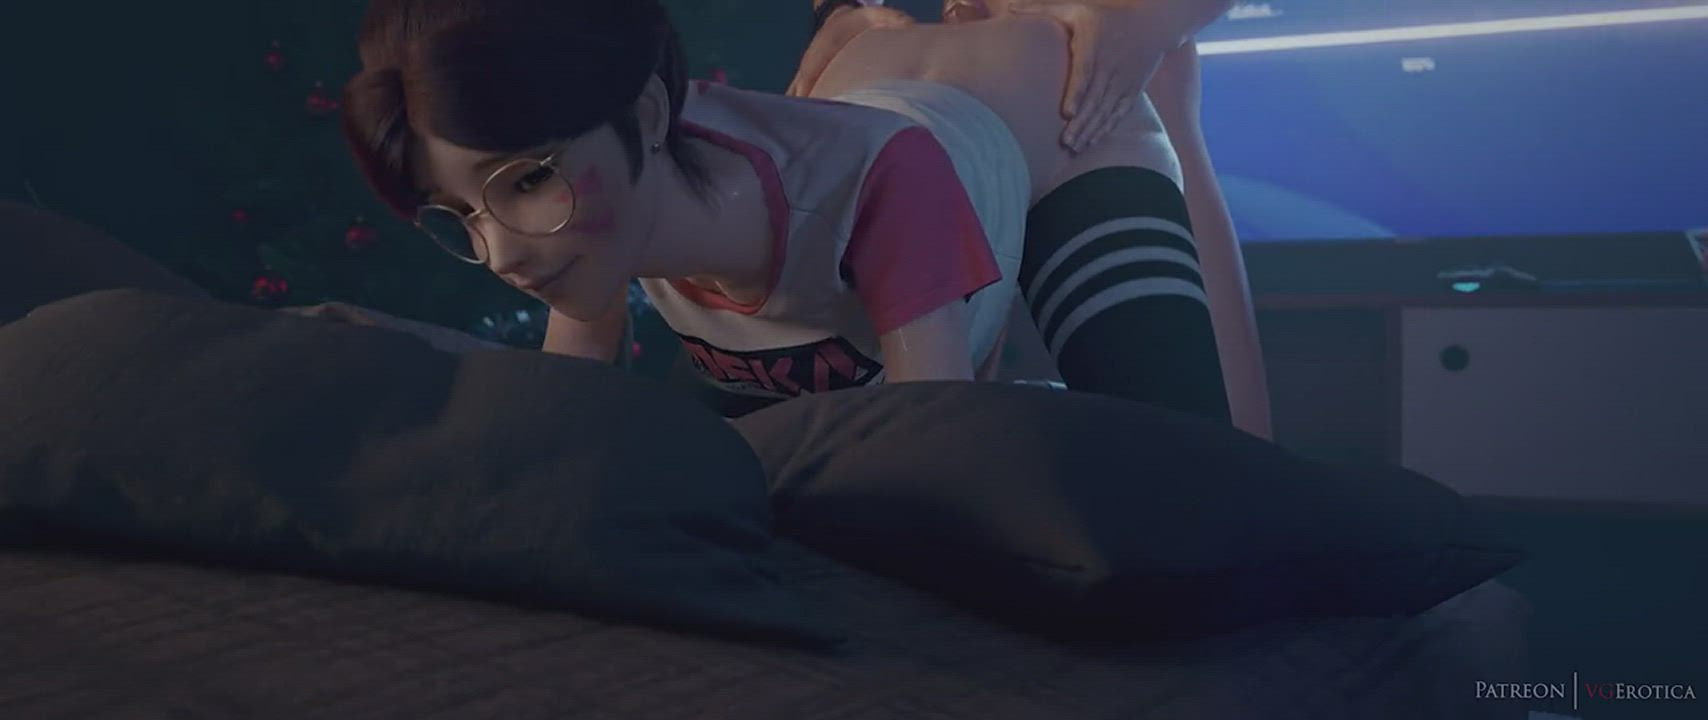 D.va Doggystyle on bed (VGerotica) [Overwatch]